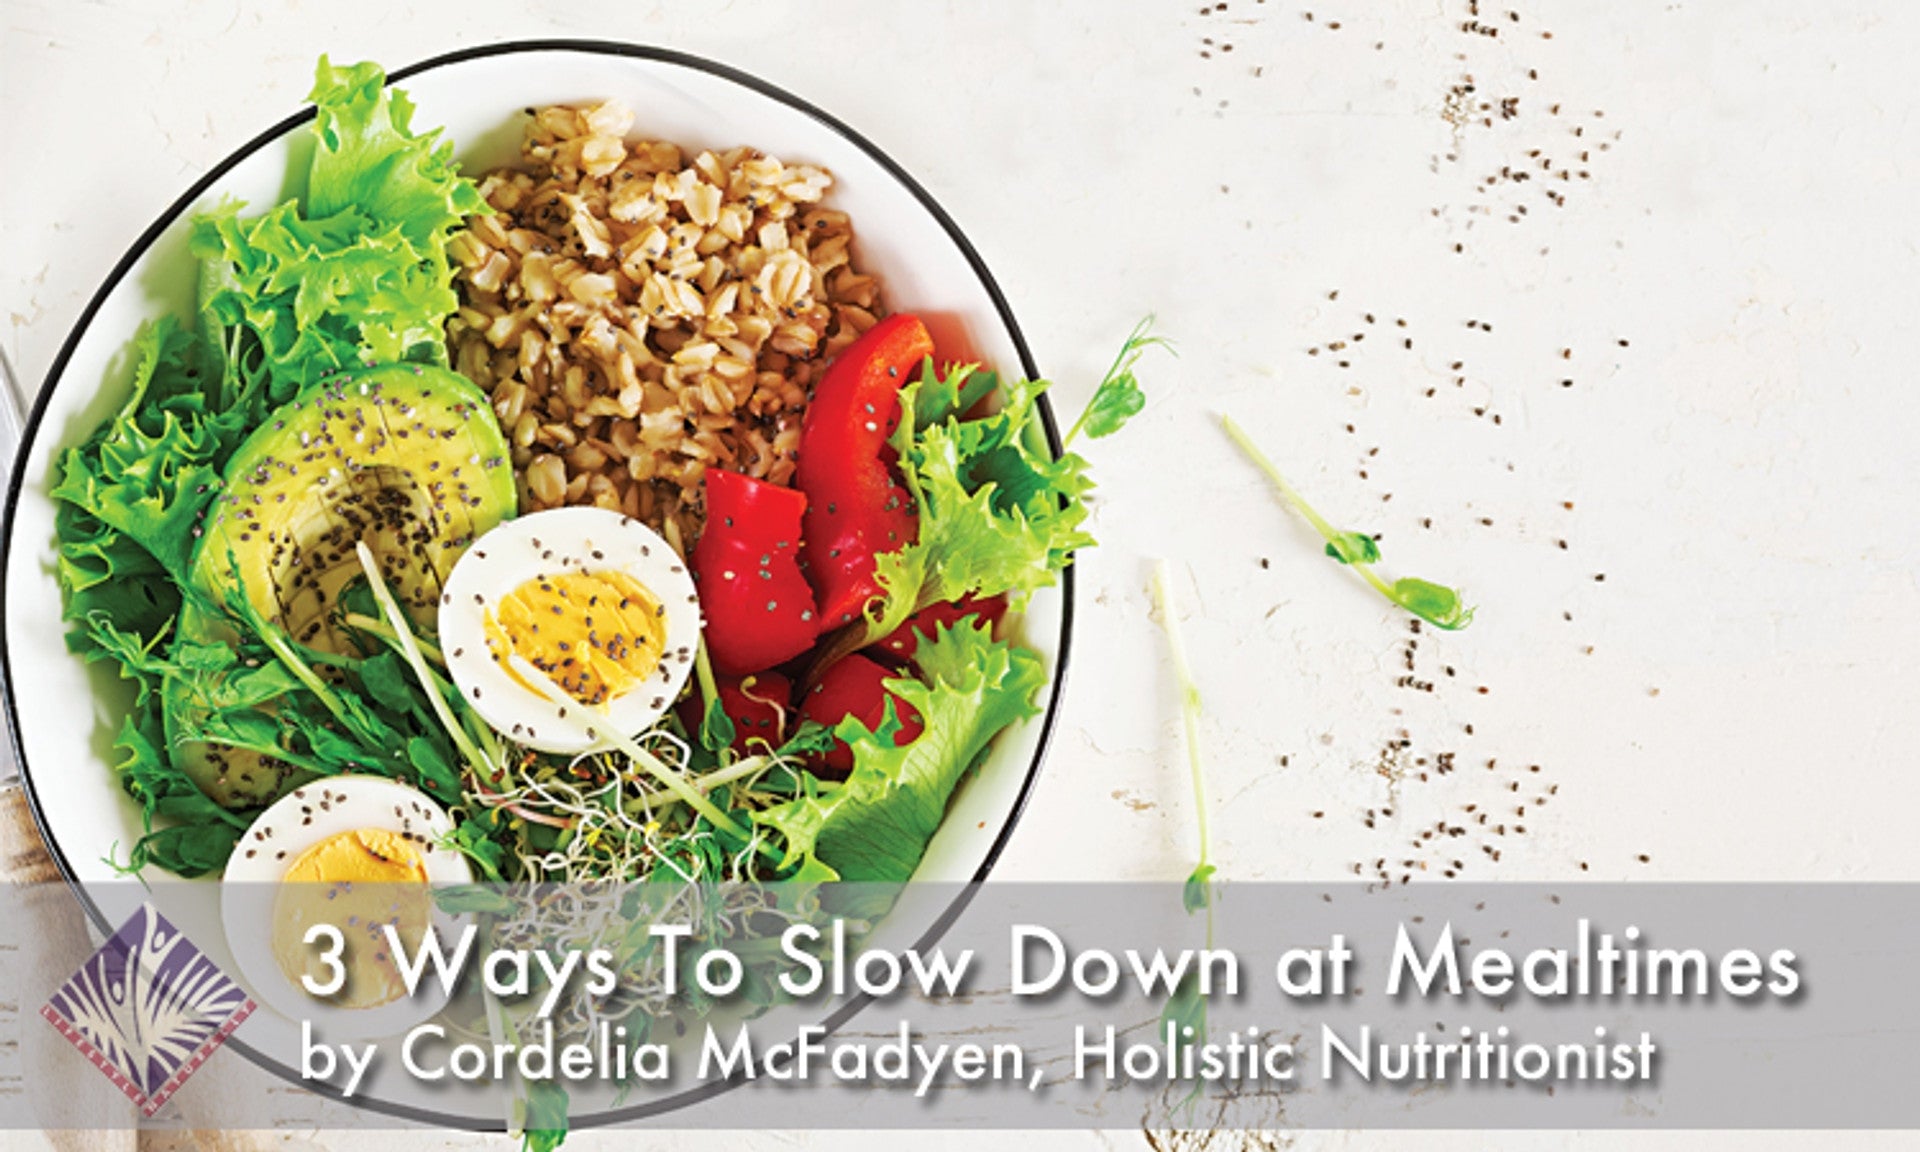 3 Ways to Slow Down at Mealtimes